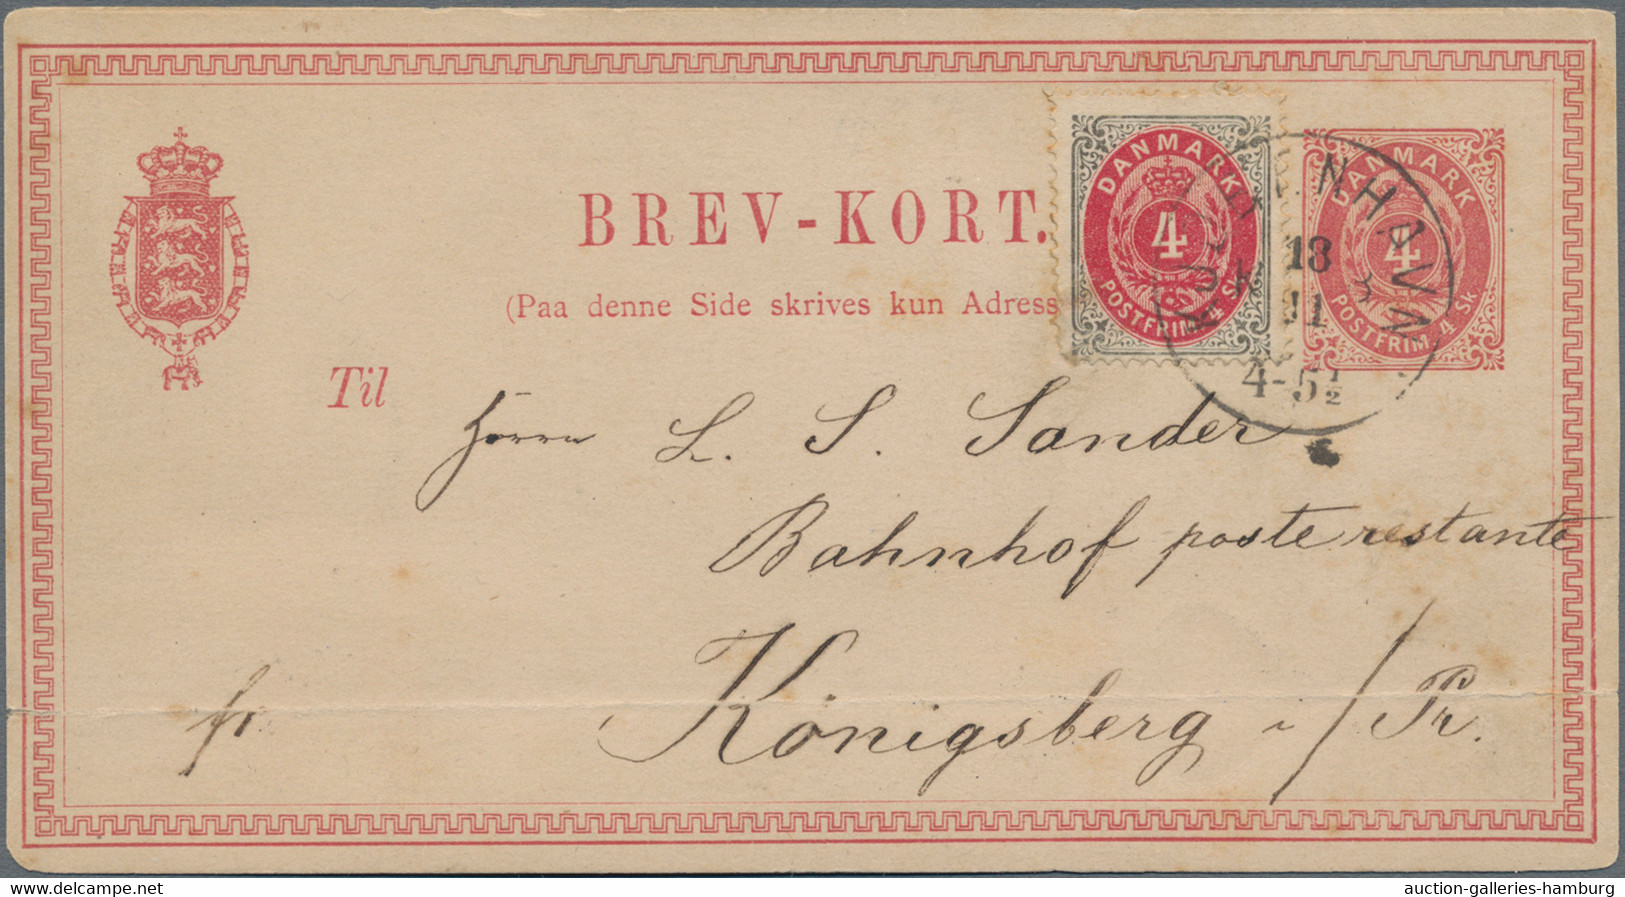 Denmark: 1874, 4 S Gray/red, With Cds "KJOBENHAVN 18/11" As Additional Franking - Covers & Documents